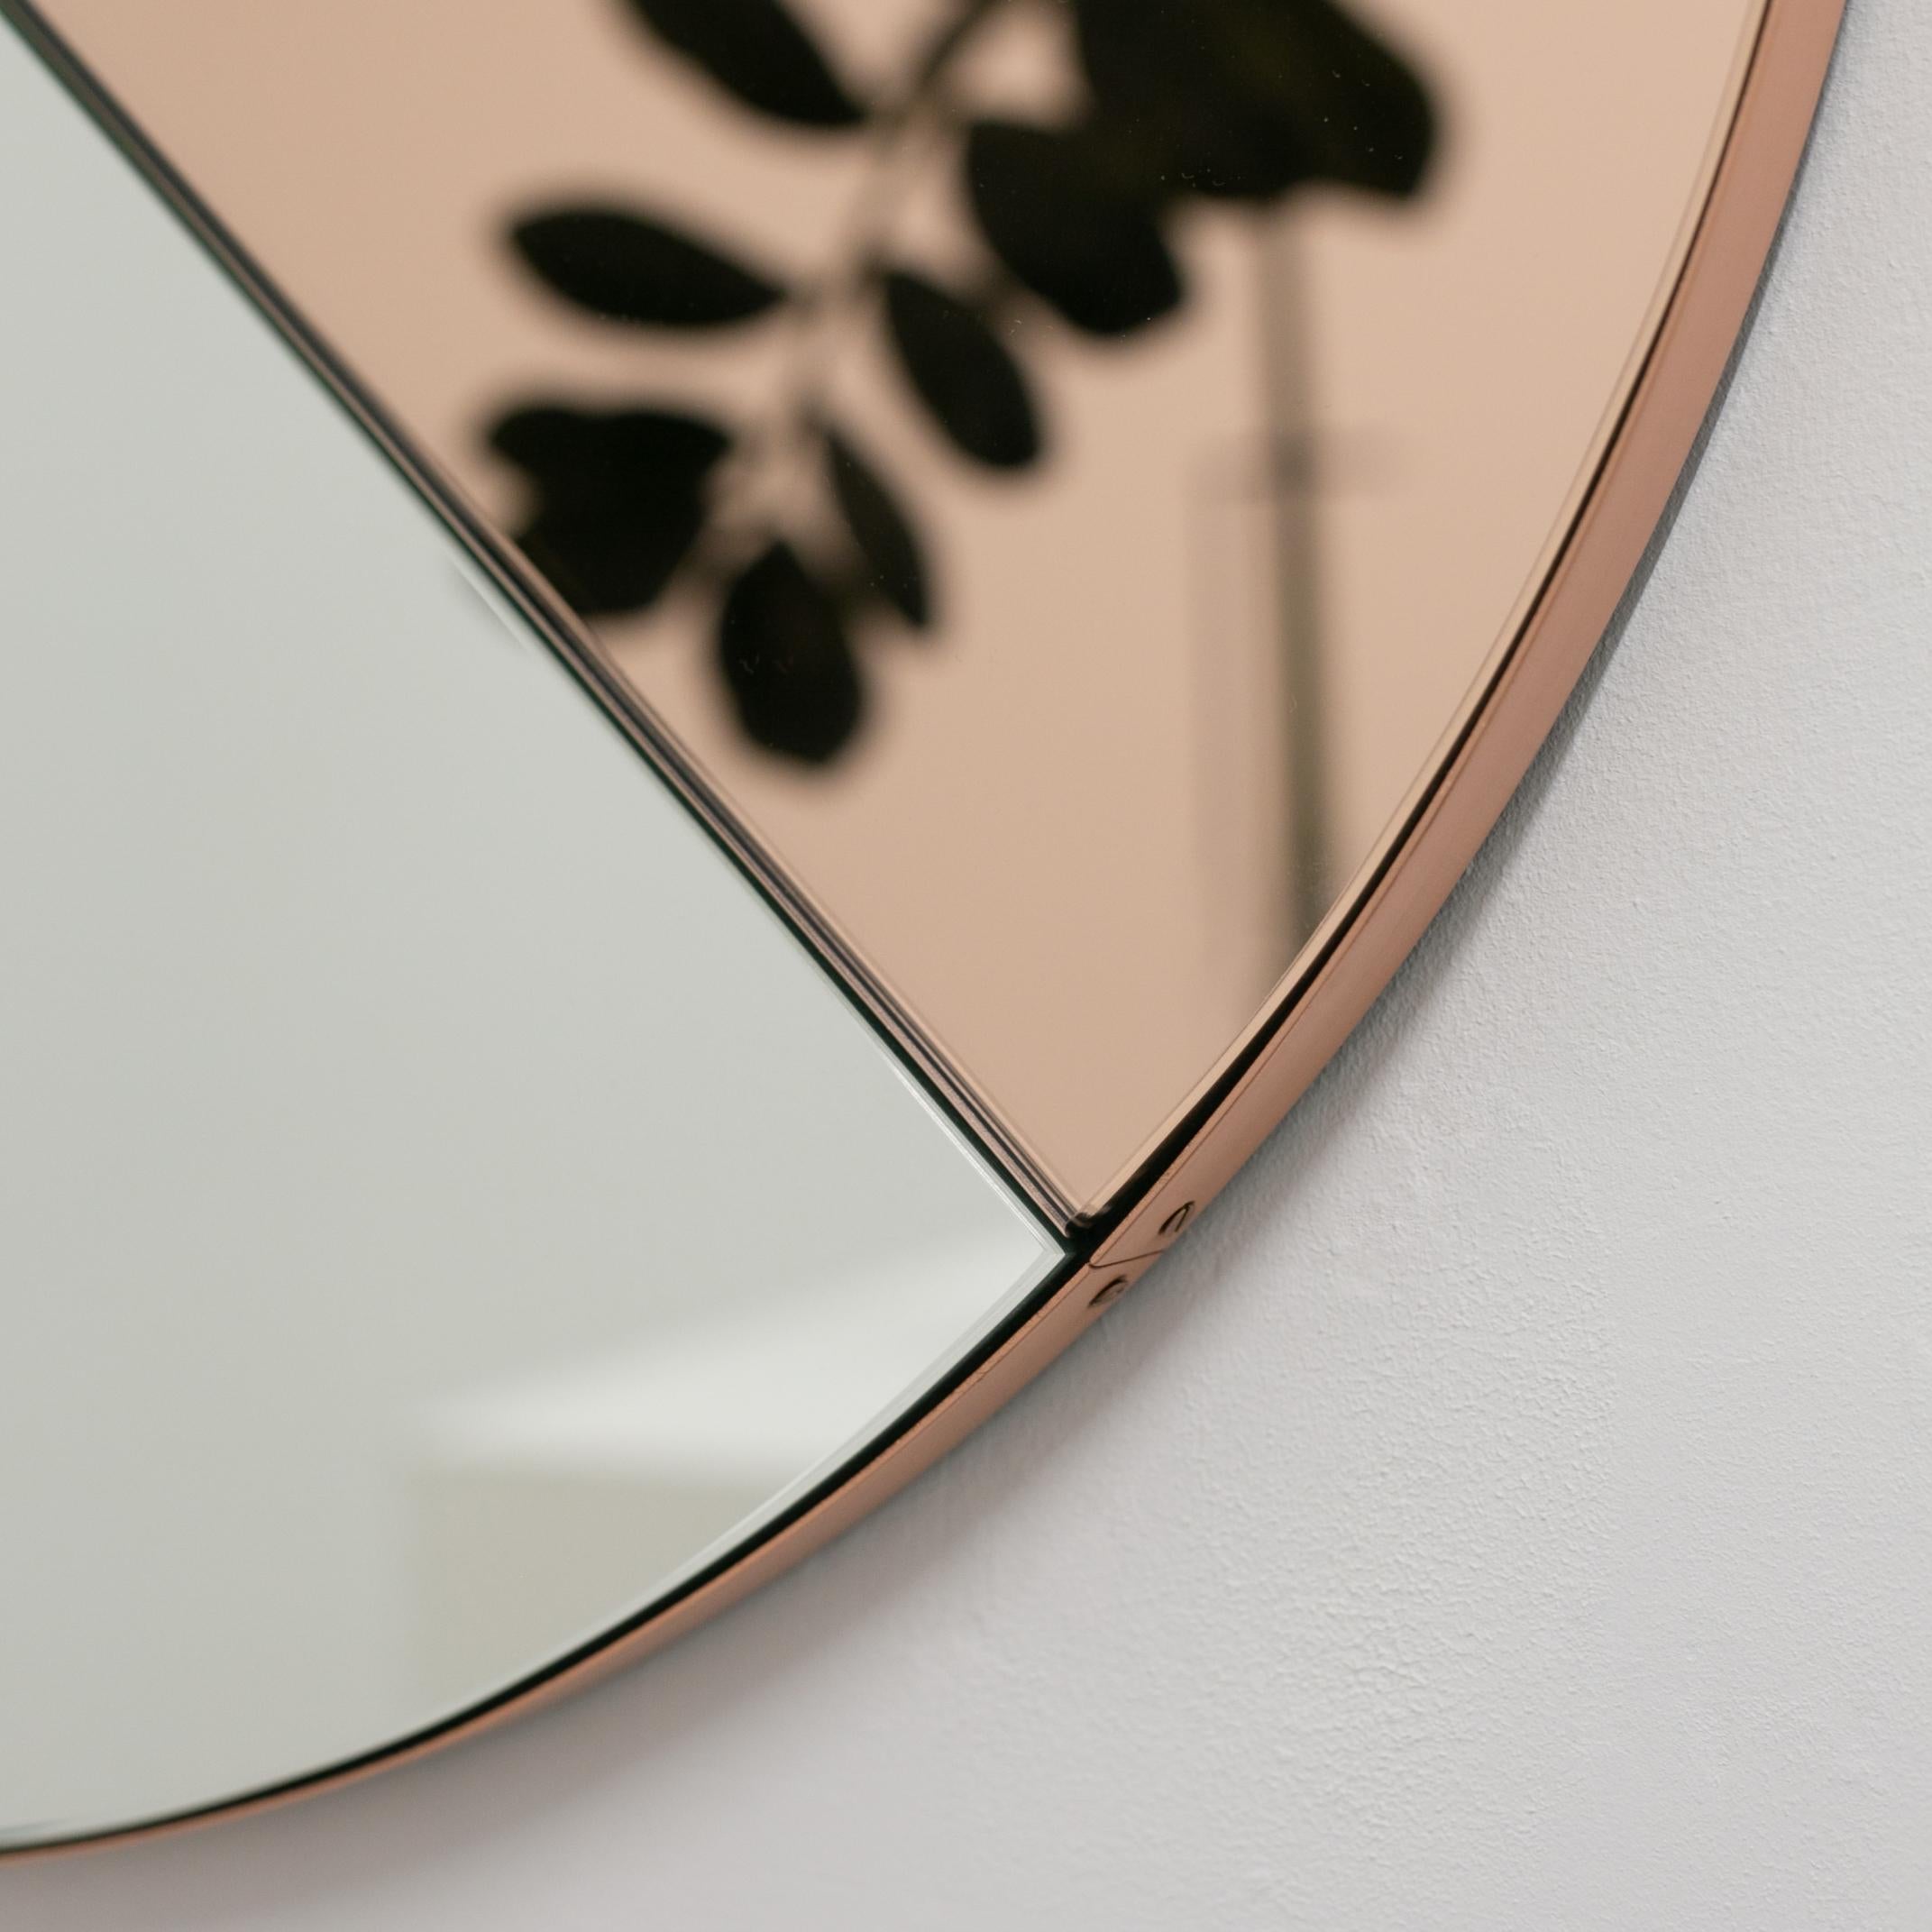 Bespoke Listing for Aurore Orbis dualis Rose gold+silver Brushed brass frame  5